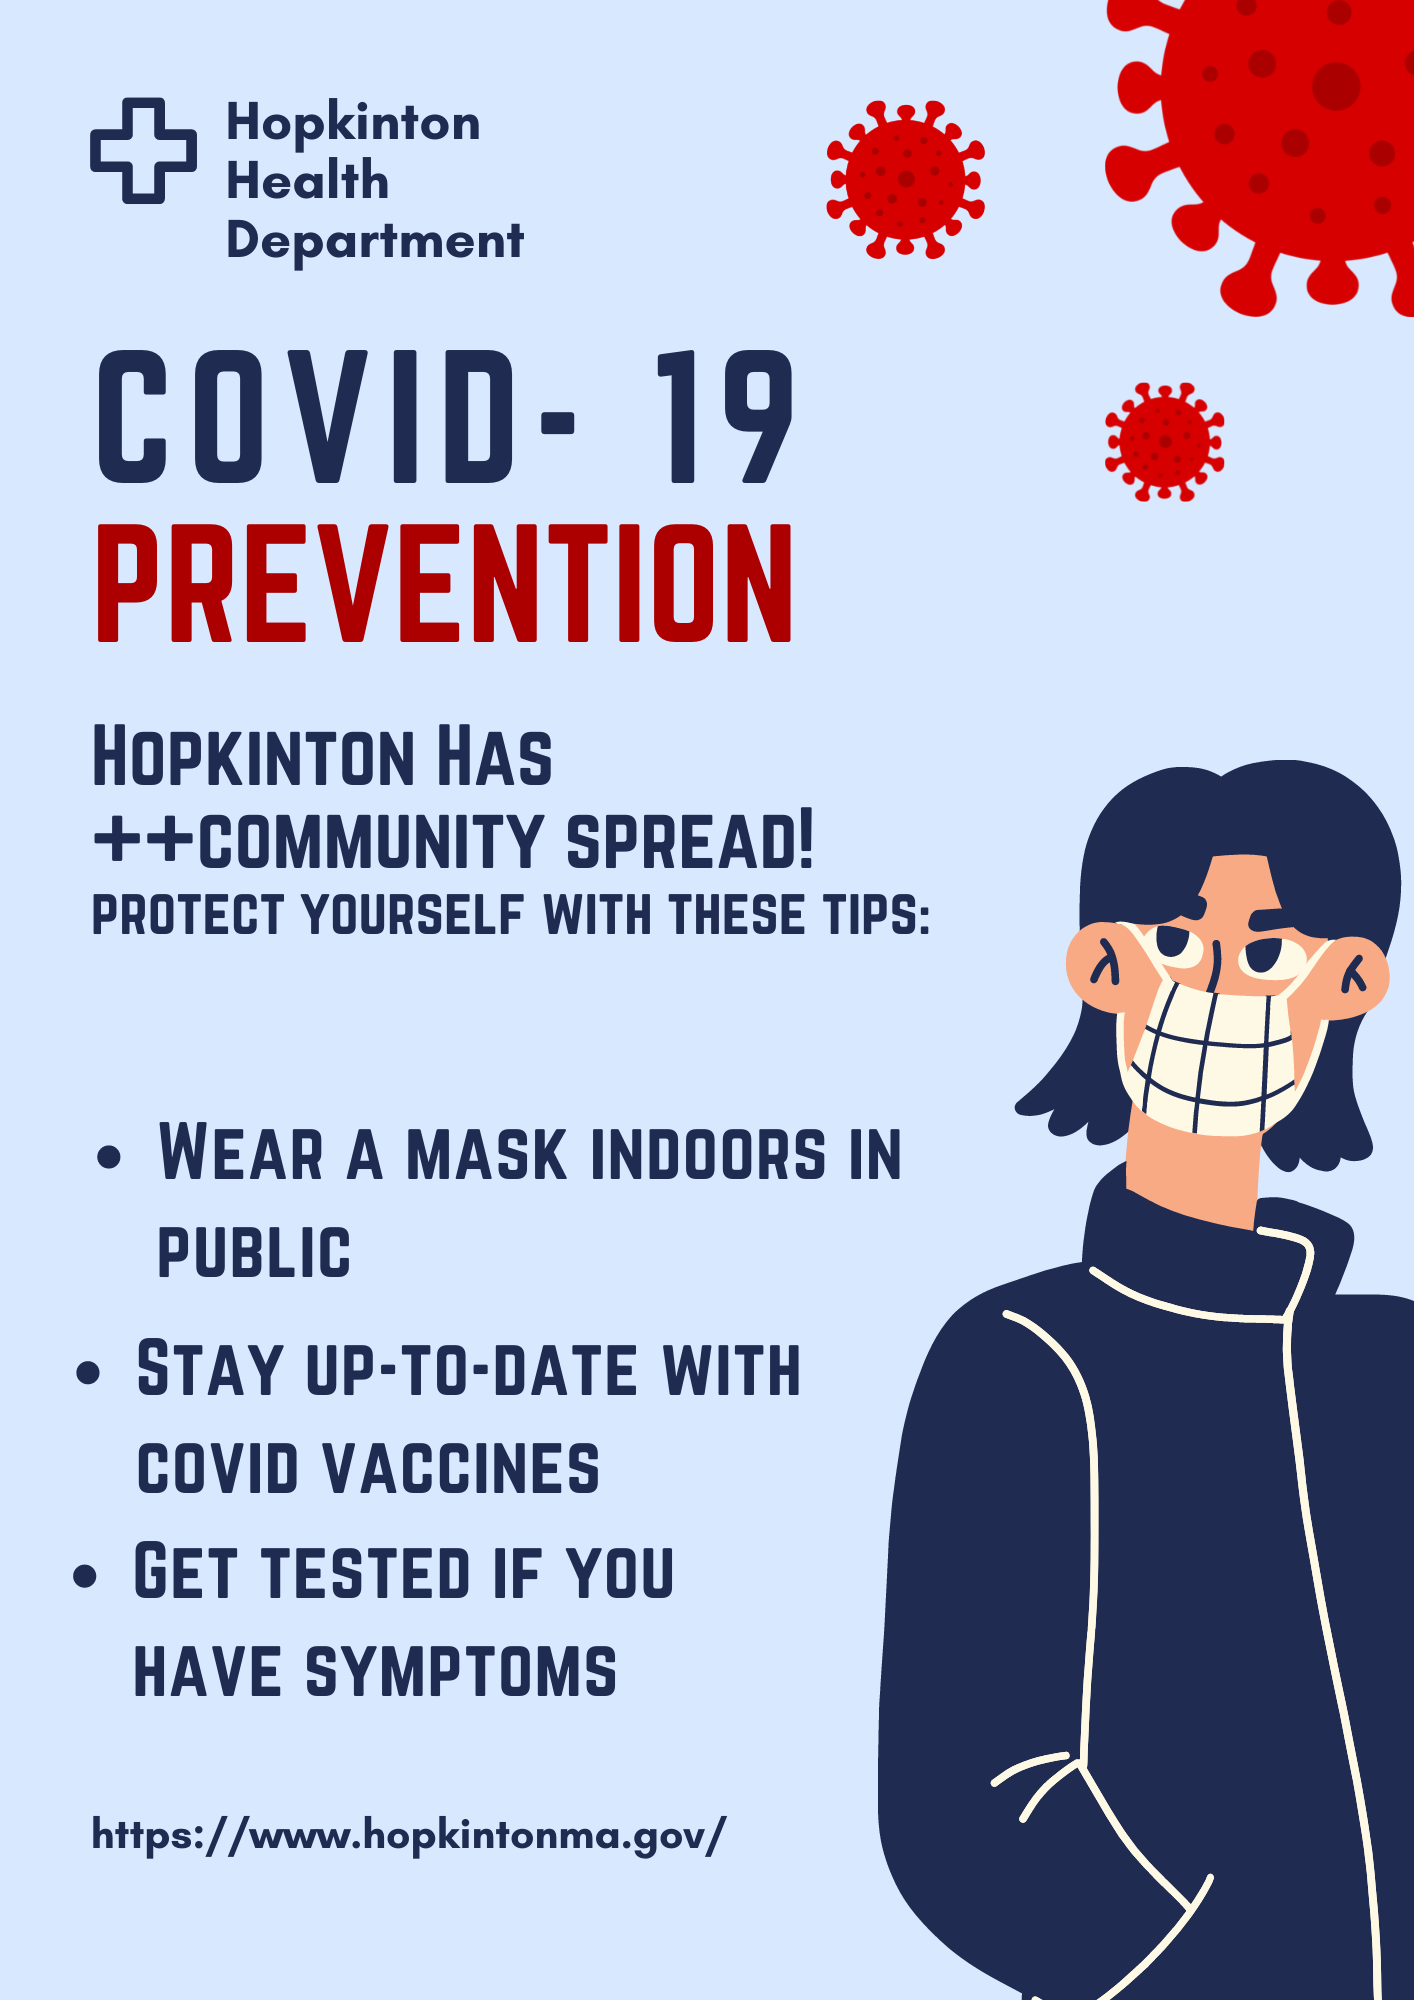 Superintendent ‘strongly recommending’ face coverings for students, staff during COVID surge